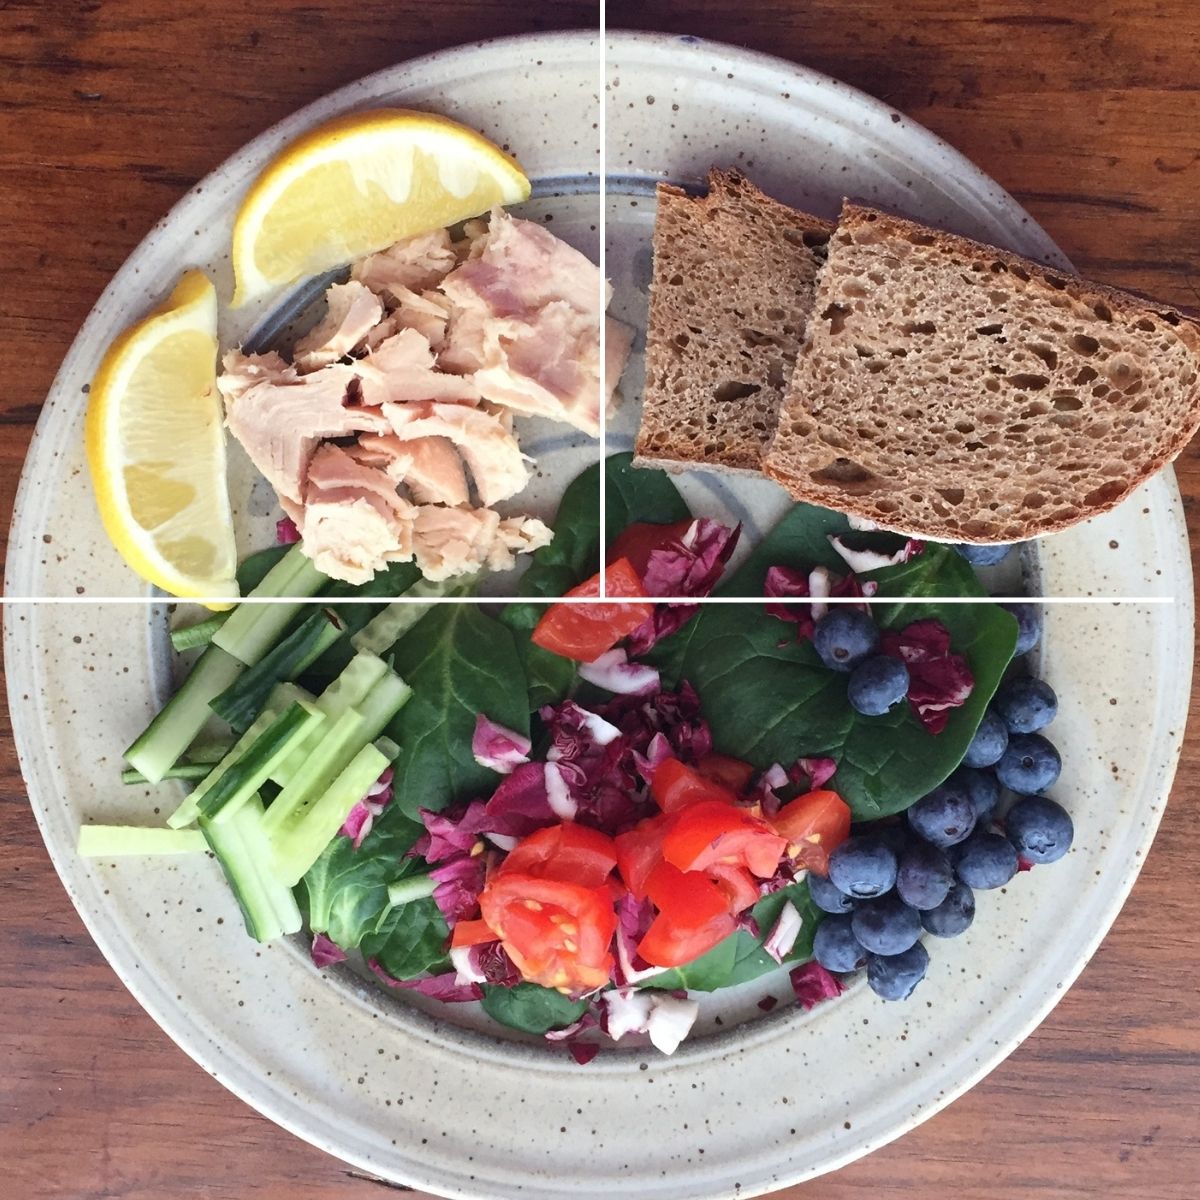 a plate of food divided to show the healthy eatinig plate method